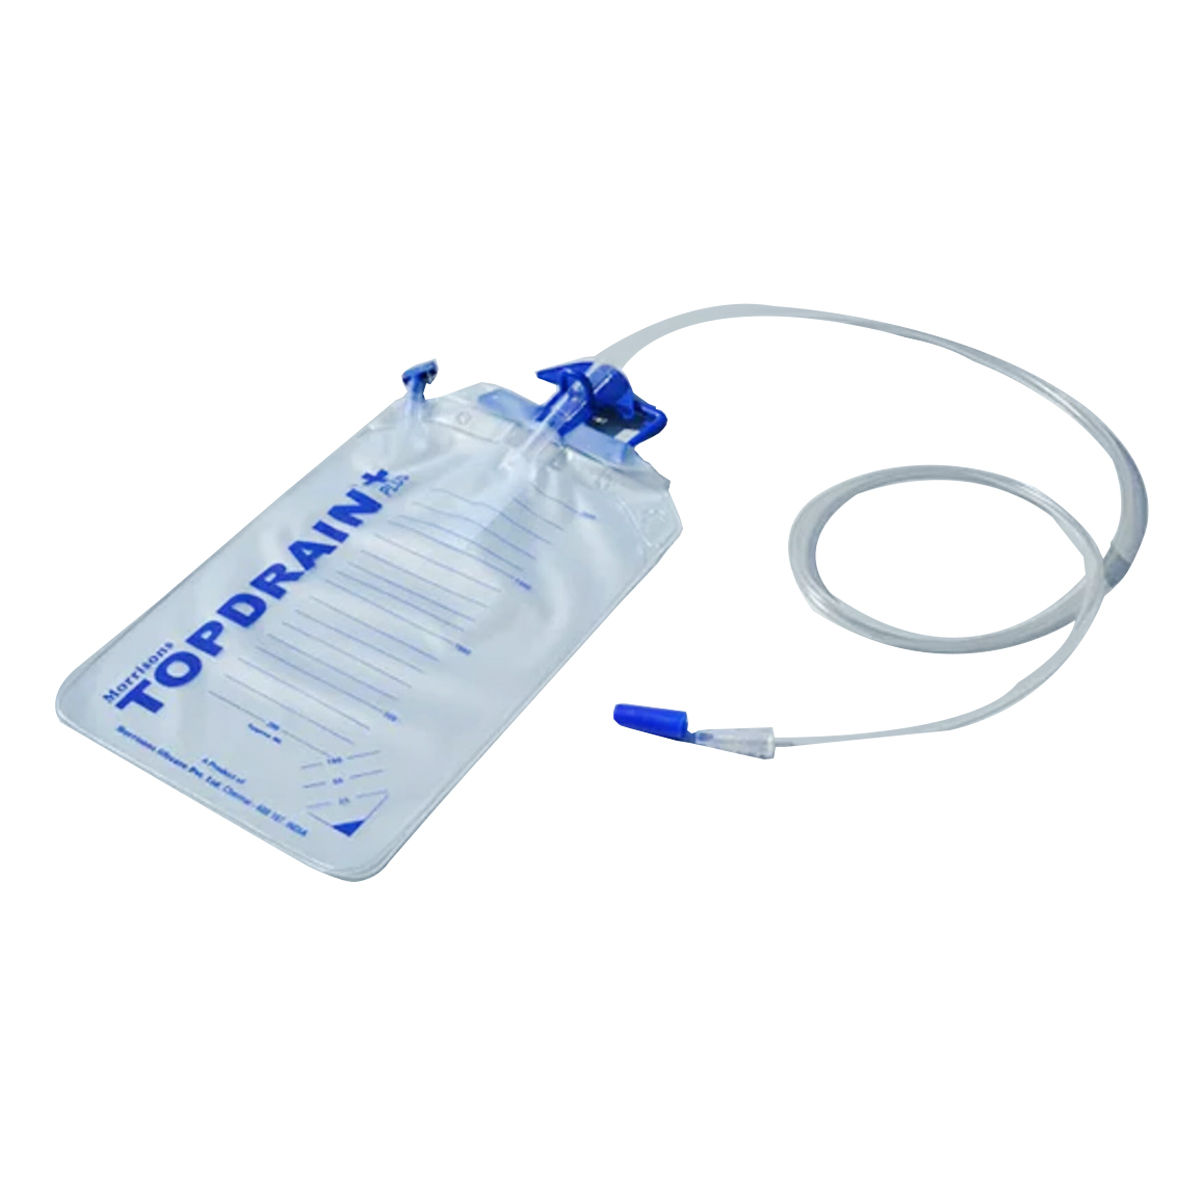 Bard Infection Control Drainage Bag With Urine Meter